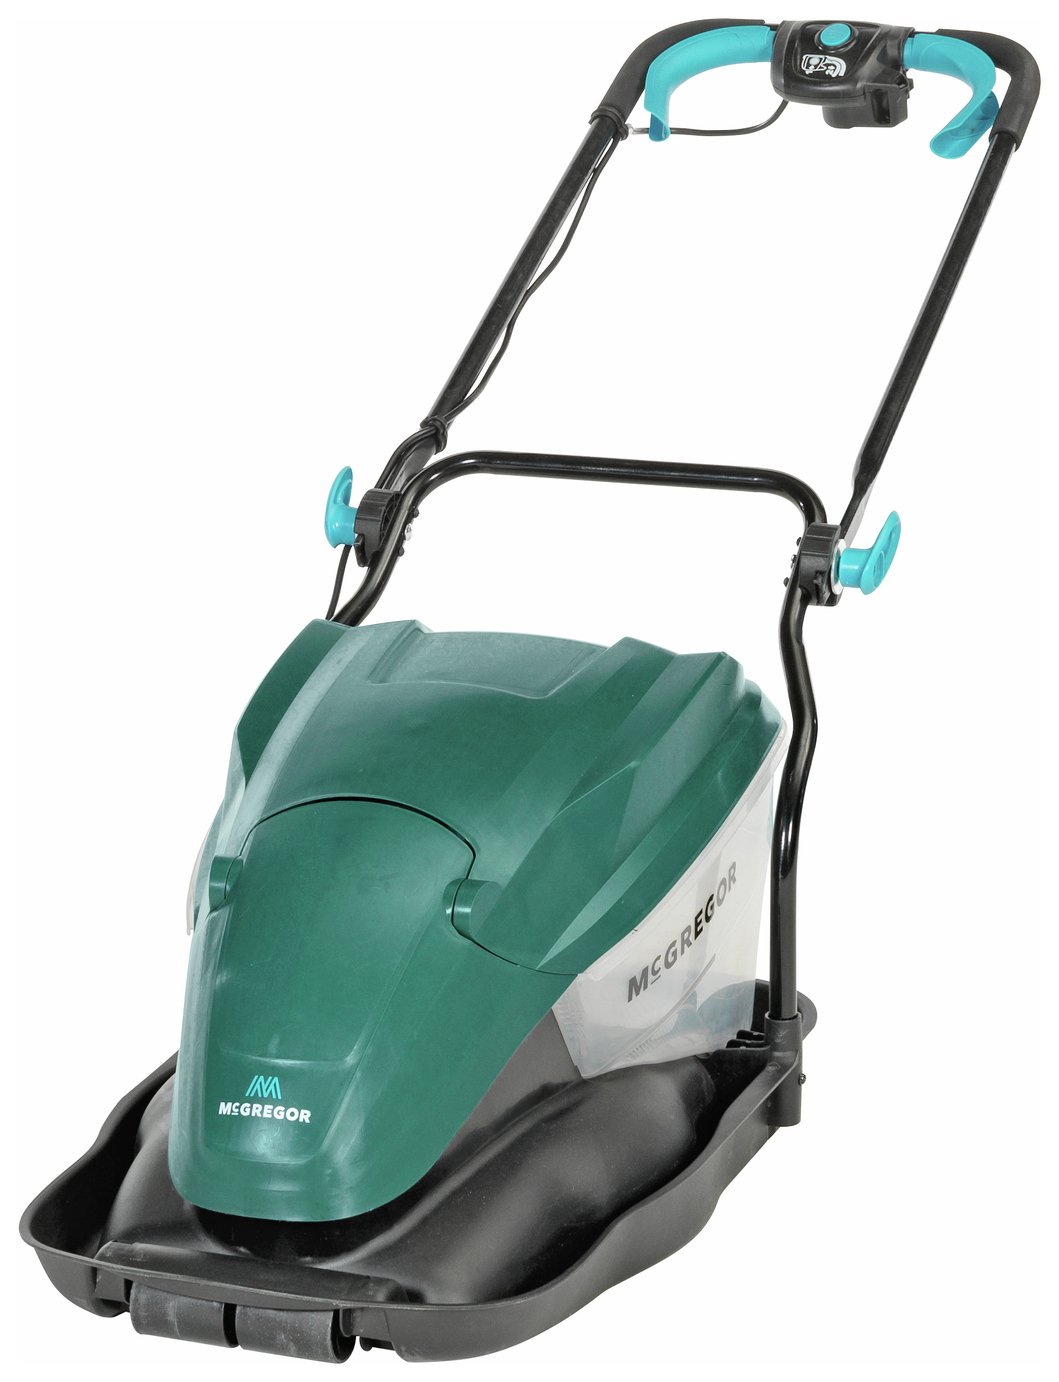 McGregor 35cm Hover Collect Lawnmower - 1700W